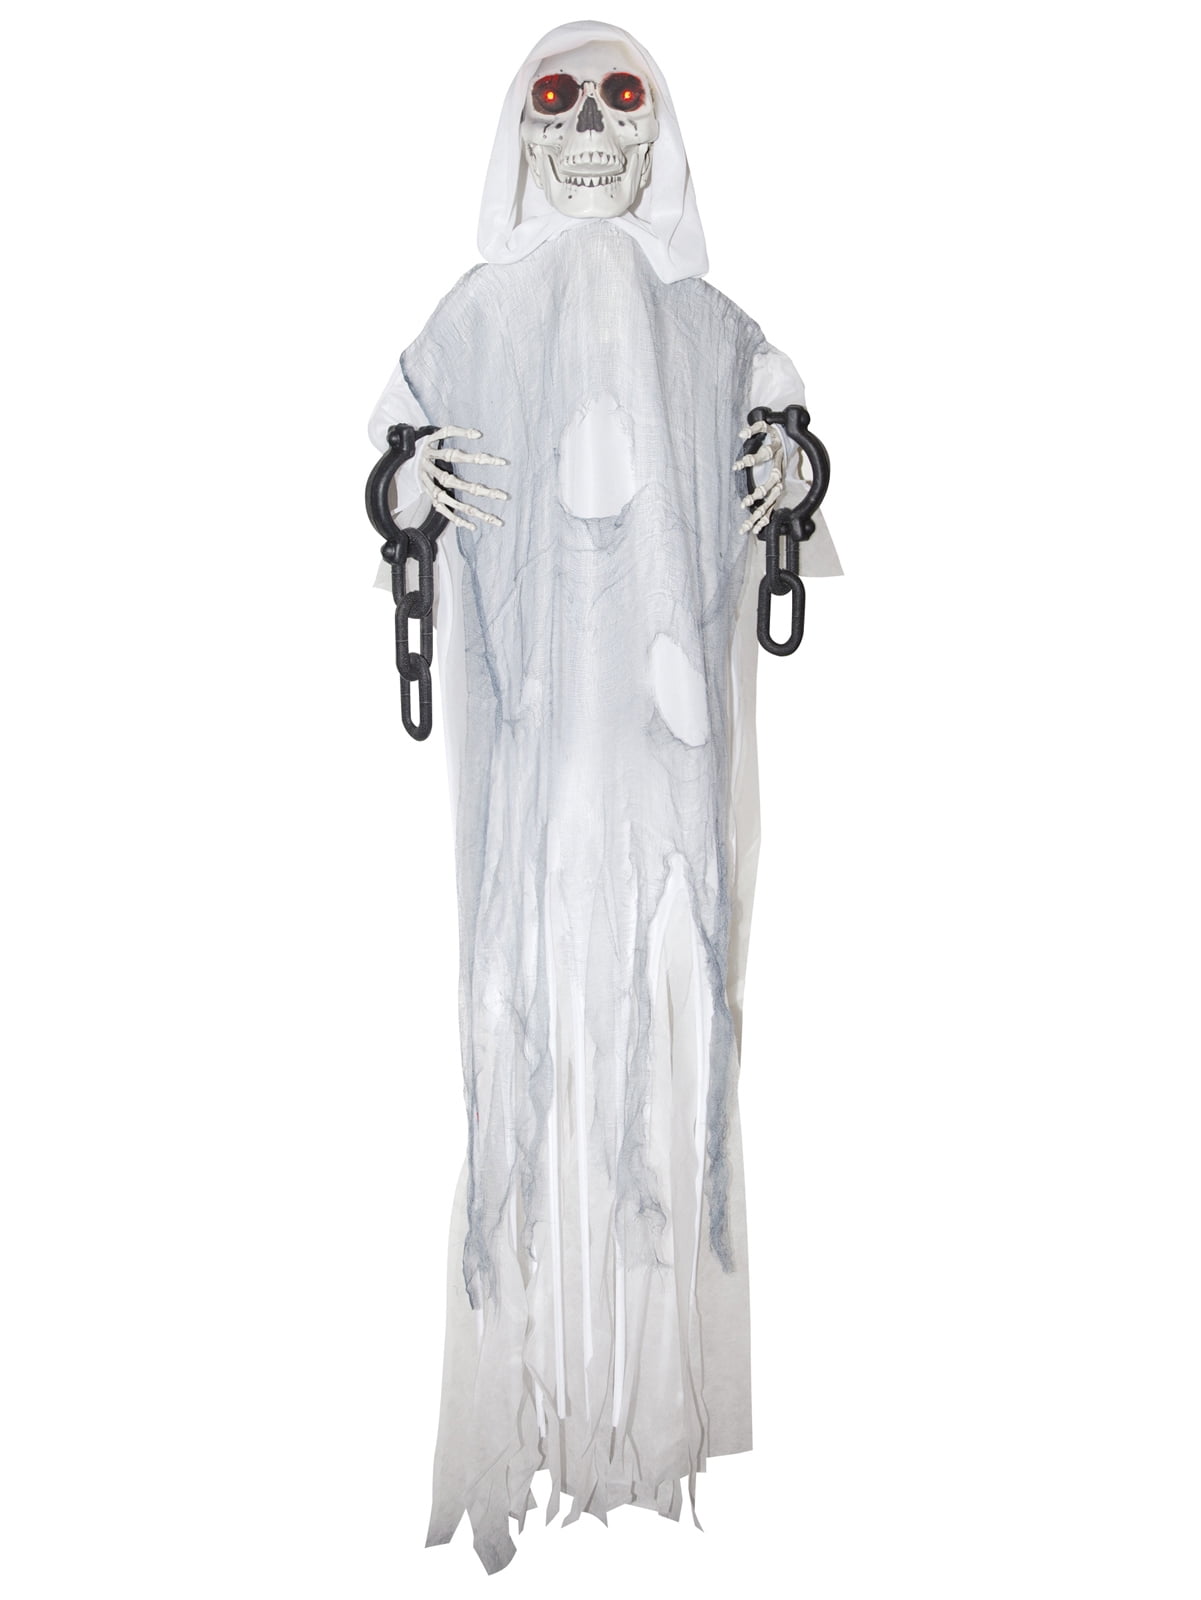 Animated Hanging White Reaper in Chains - Walmart.com